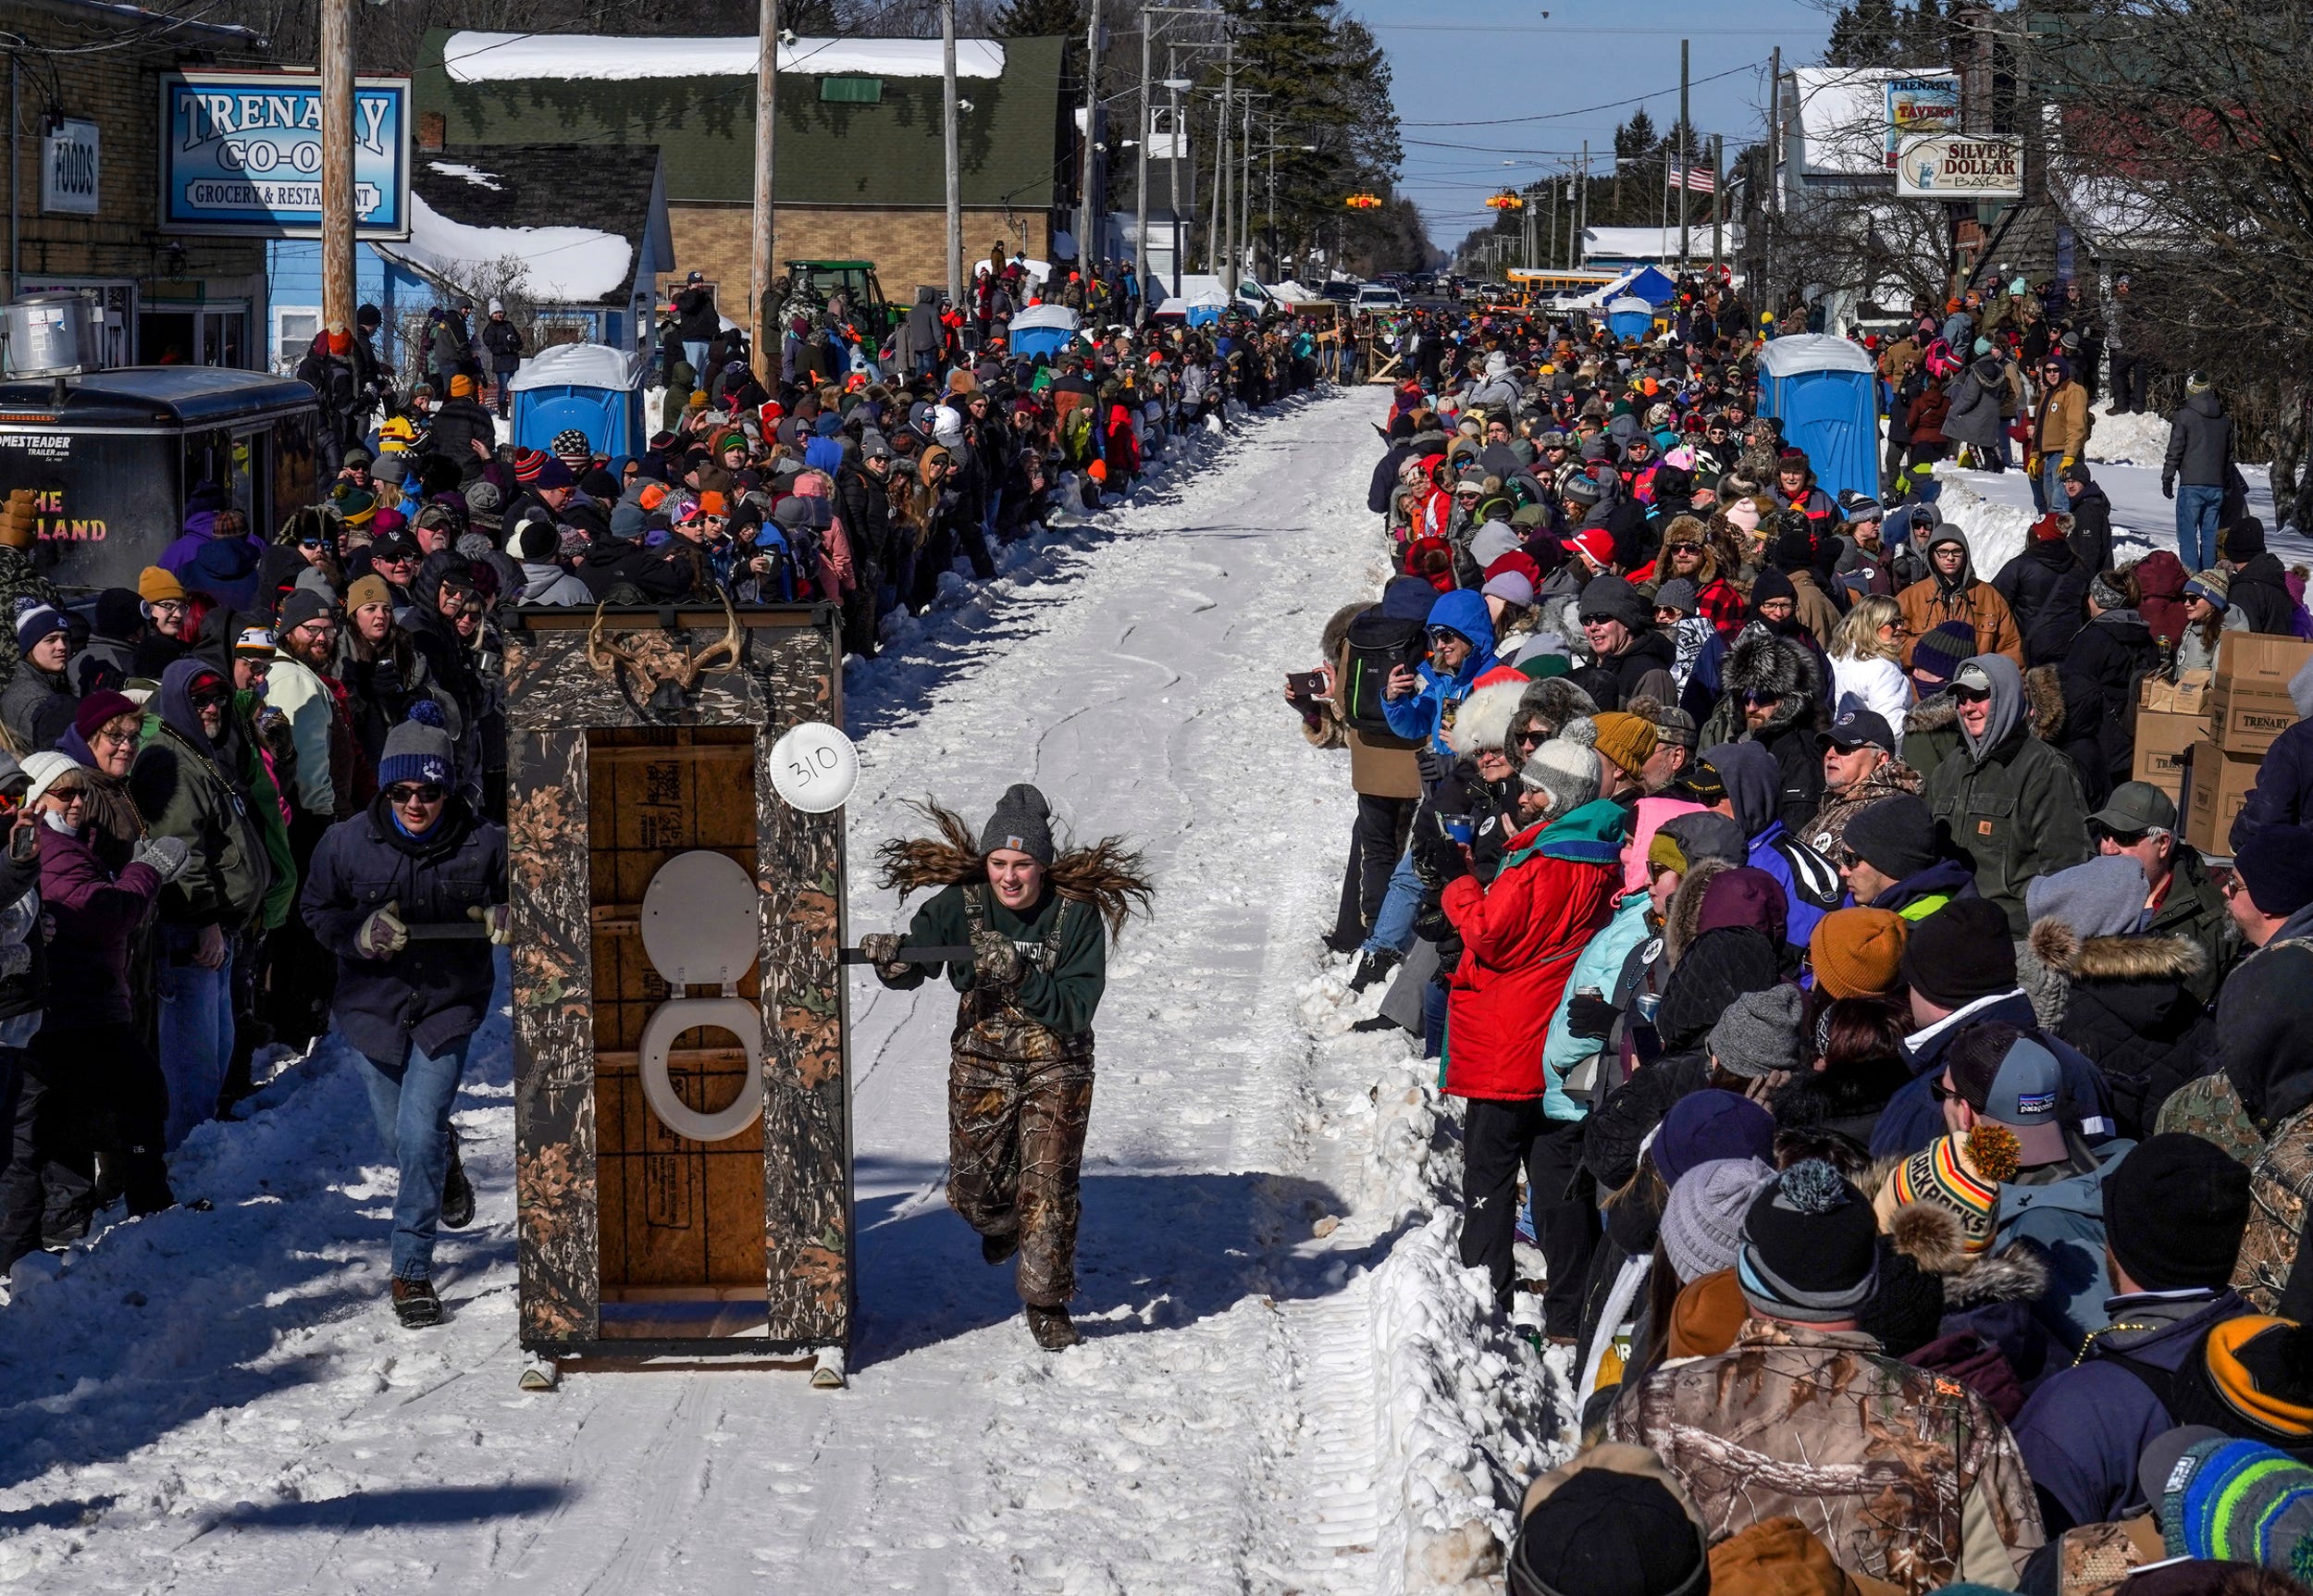 Michigan U.P. race, the Trenary Outhouse Classic, is long tradition